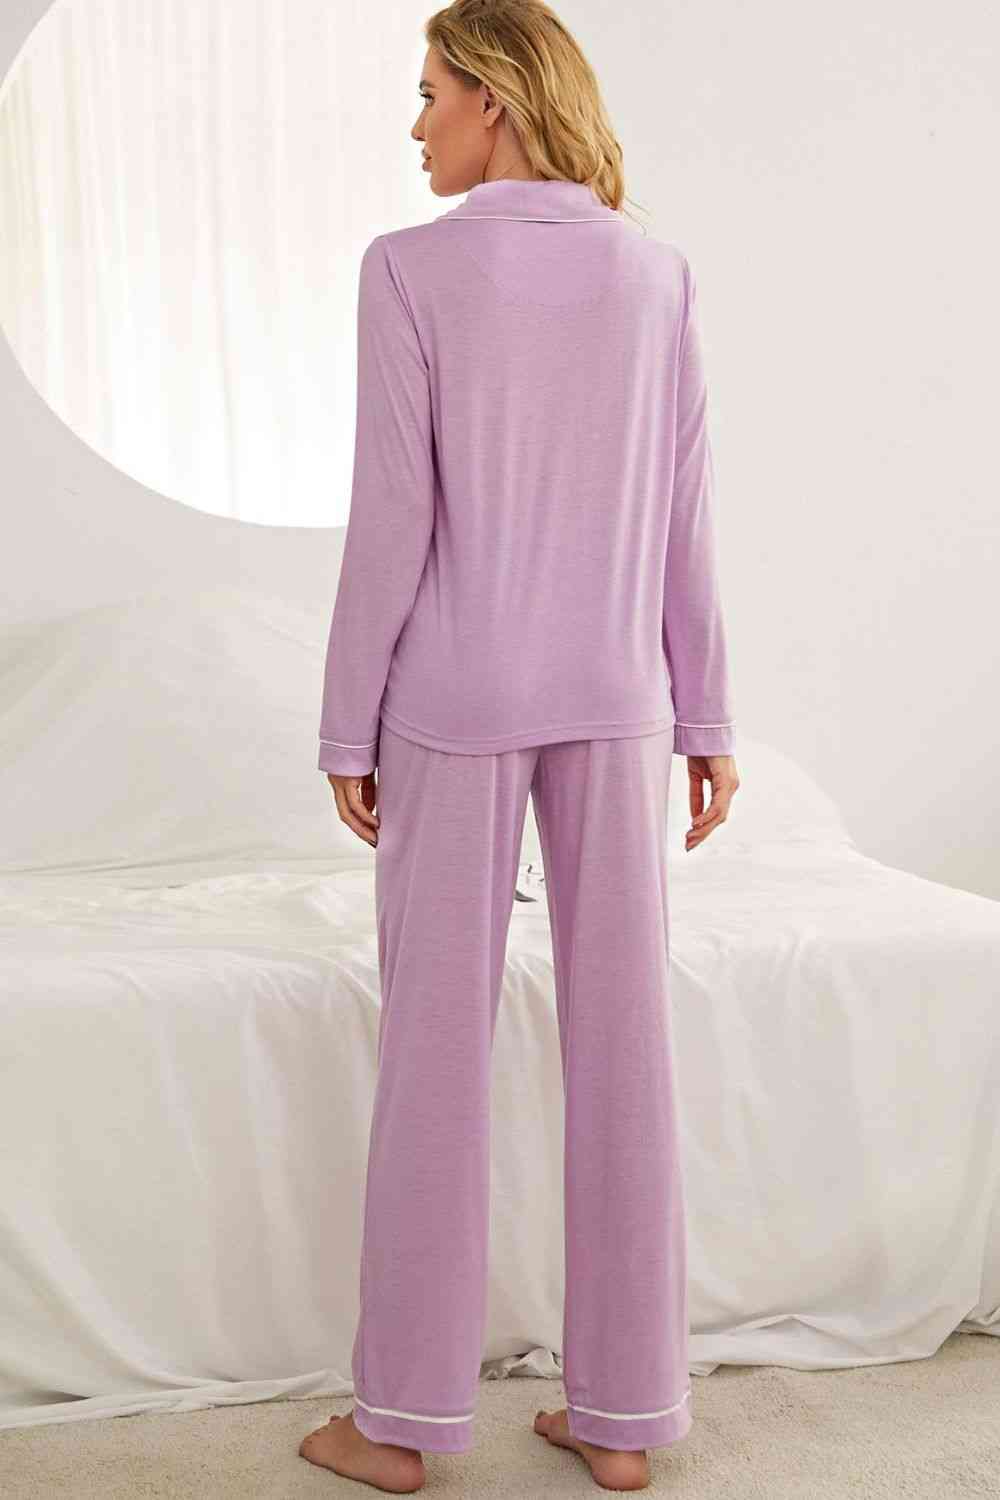 Contrast Piping Button Down Top and Pants Loungewear Set (2 Colors)